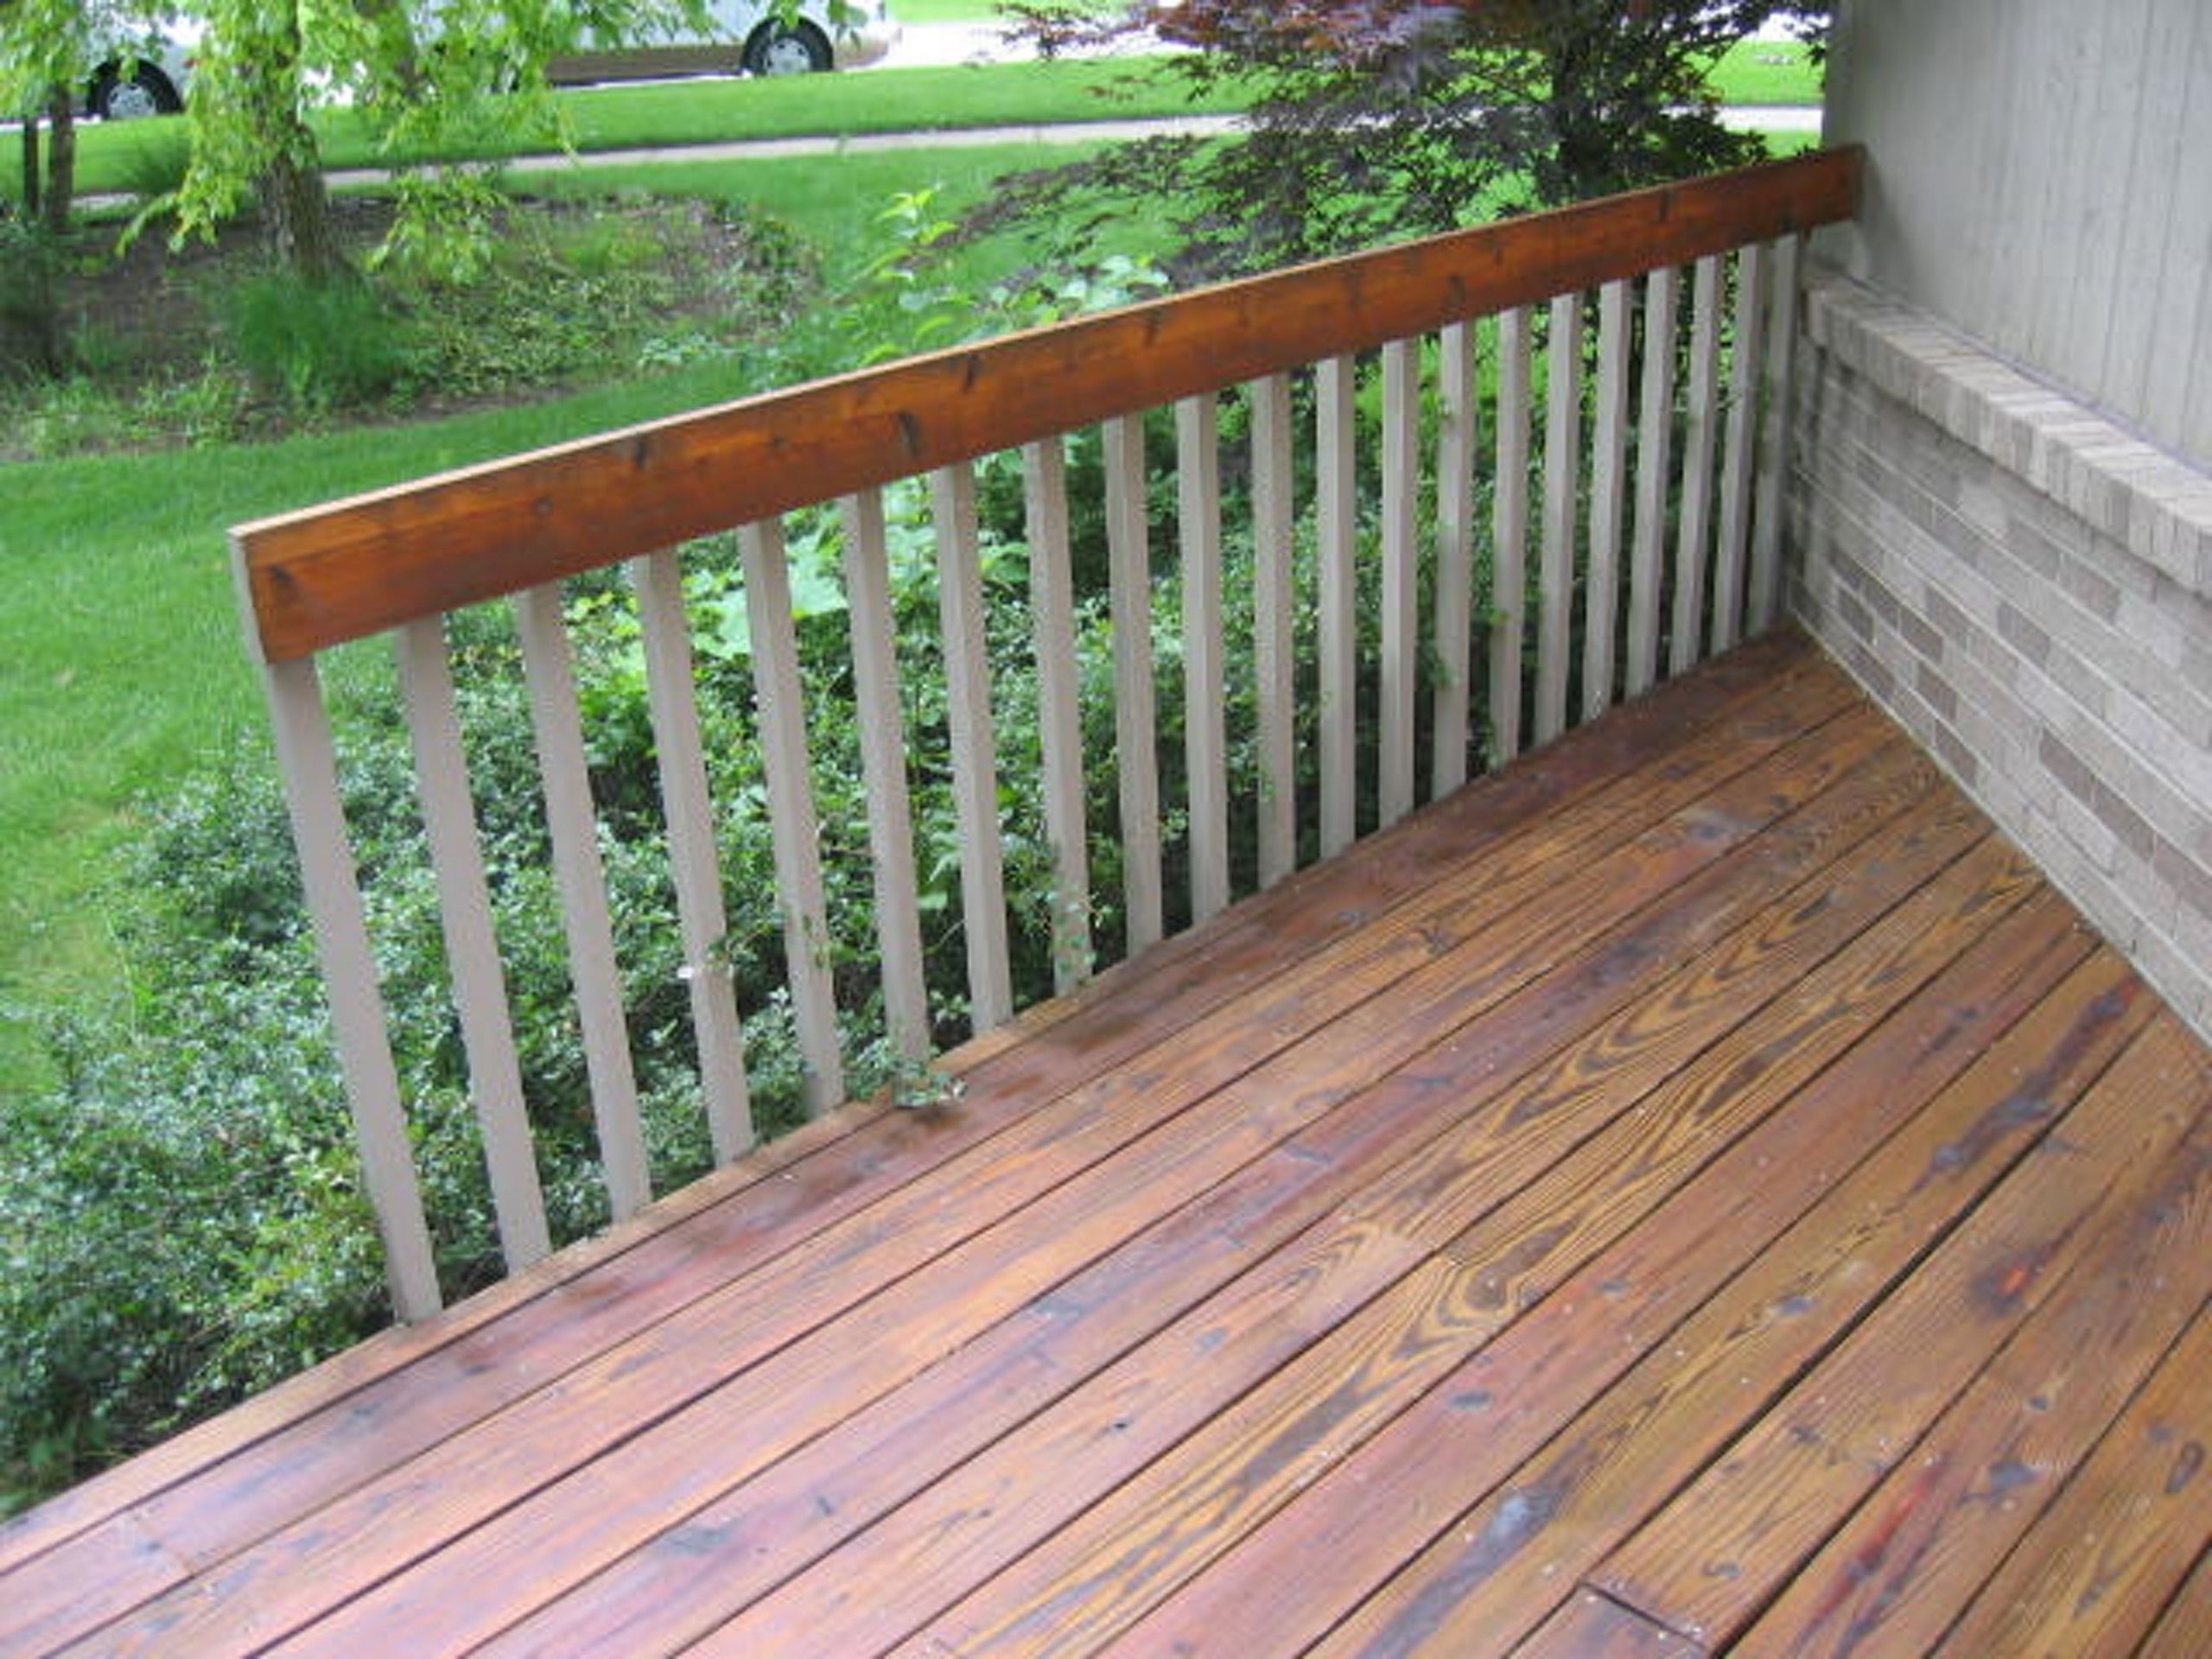 Strip Paint Off Deck
 How To Strip Paint From Deck Railing